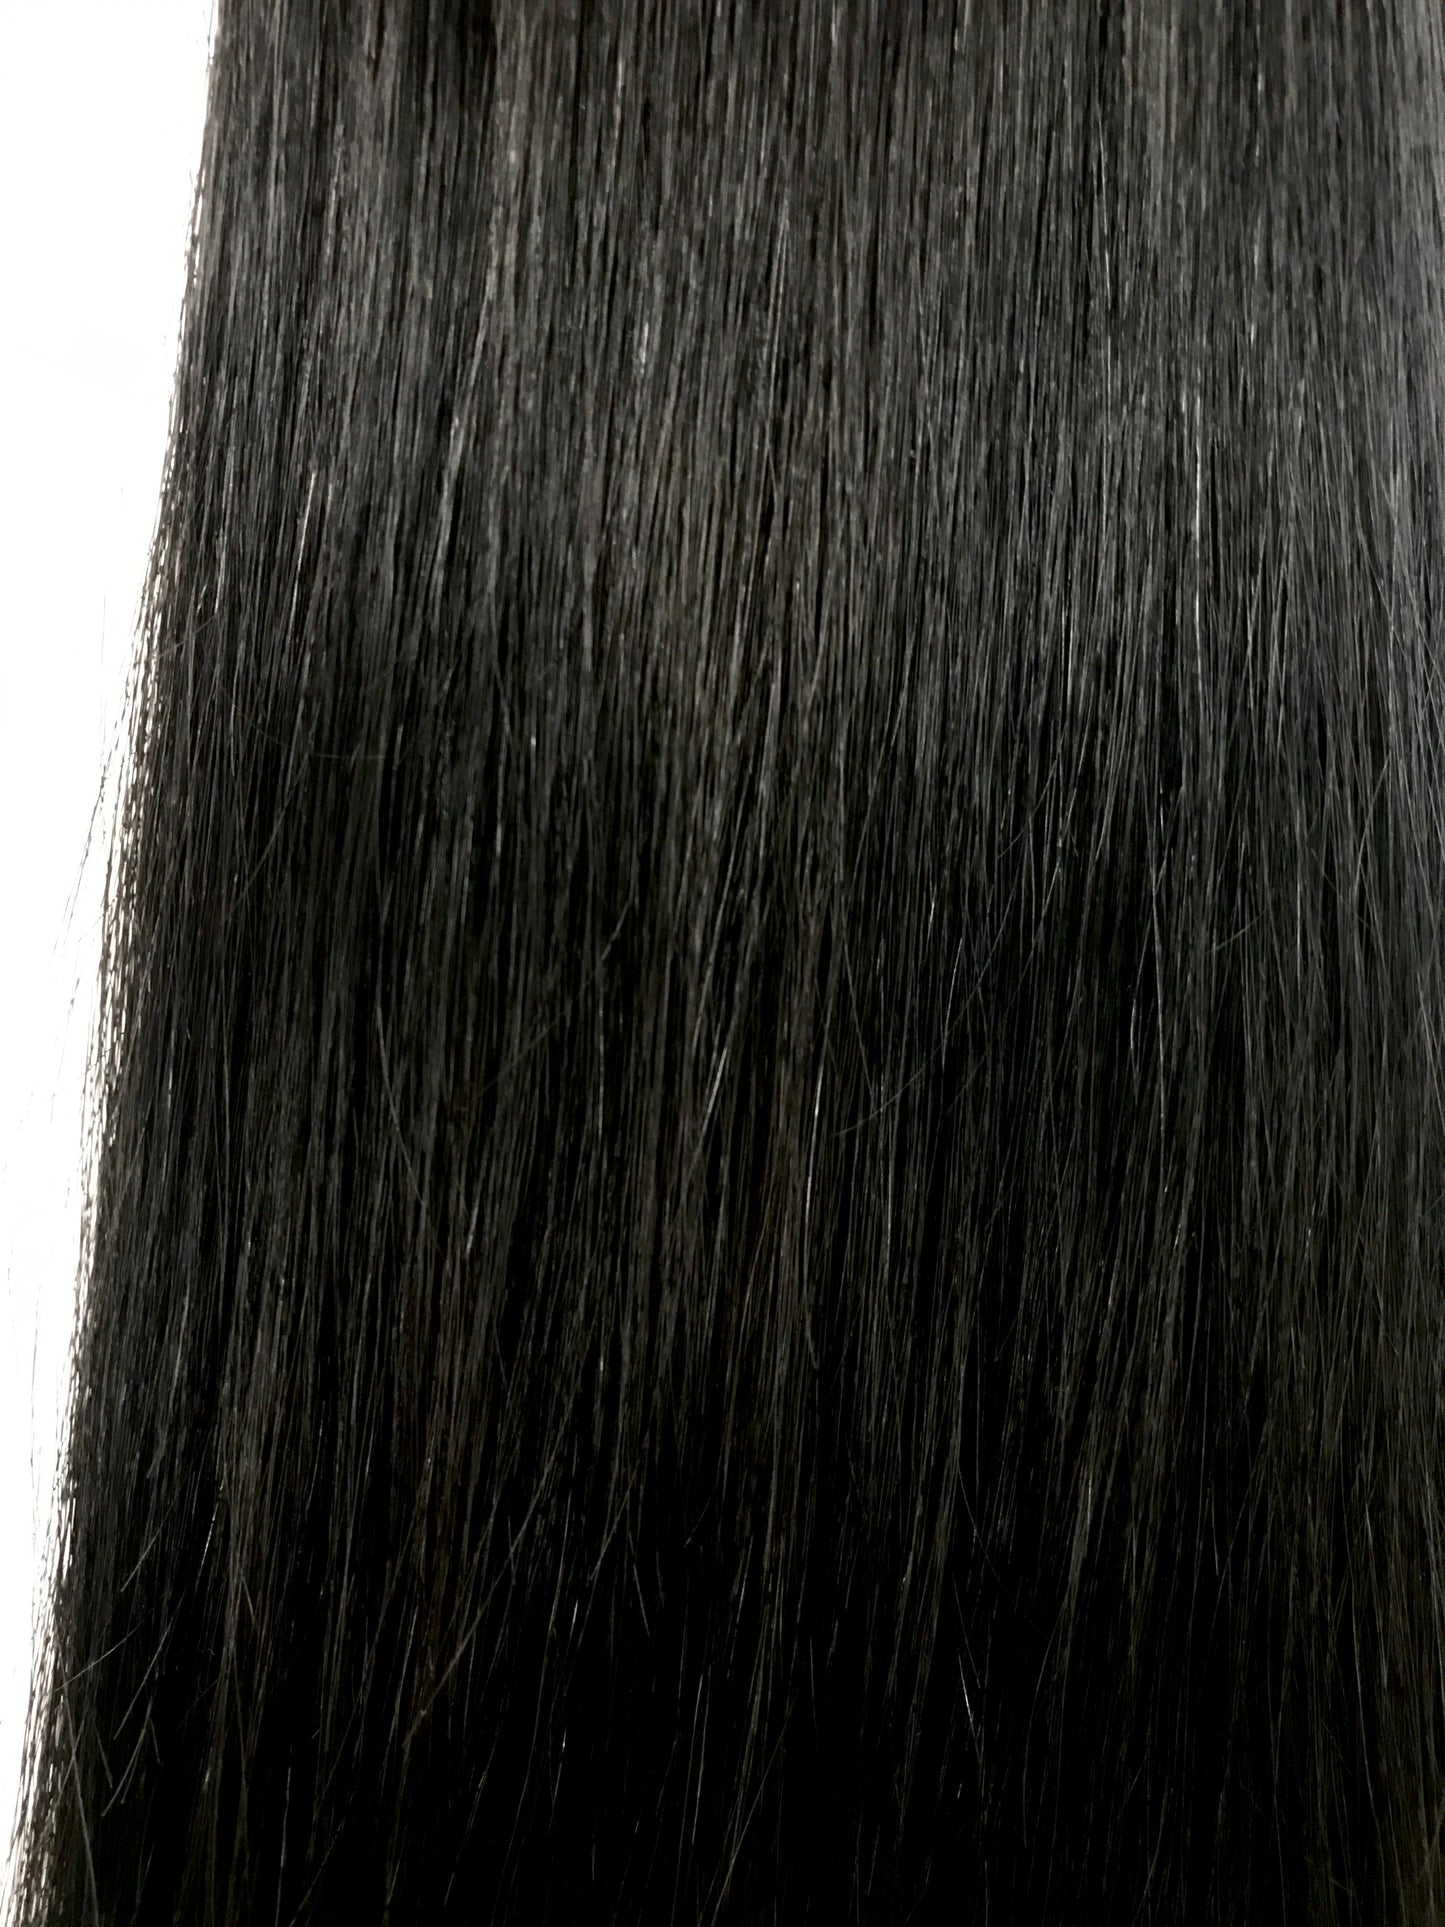 Brazilian Remy Human Hair, Weft, Straight, 18'',Quick Shipping!